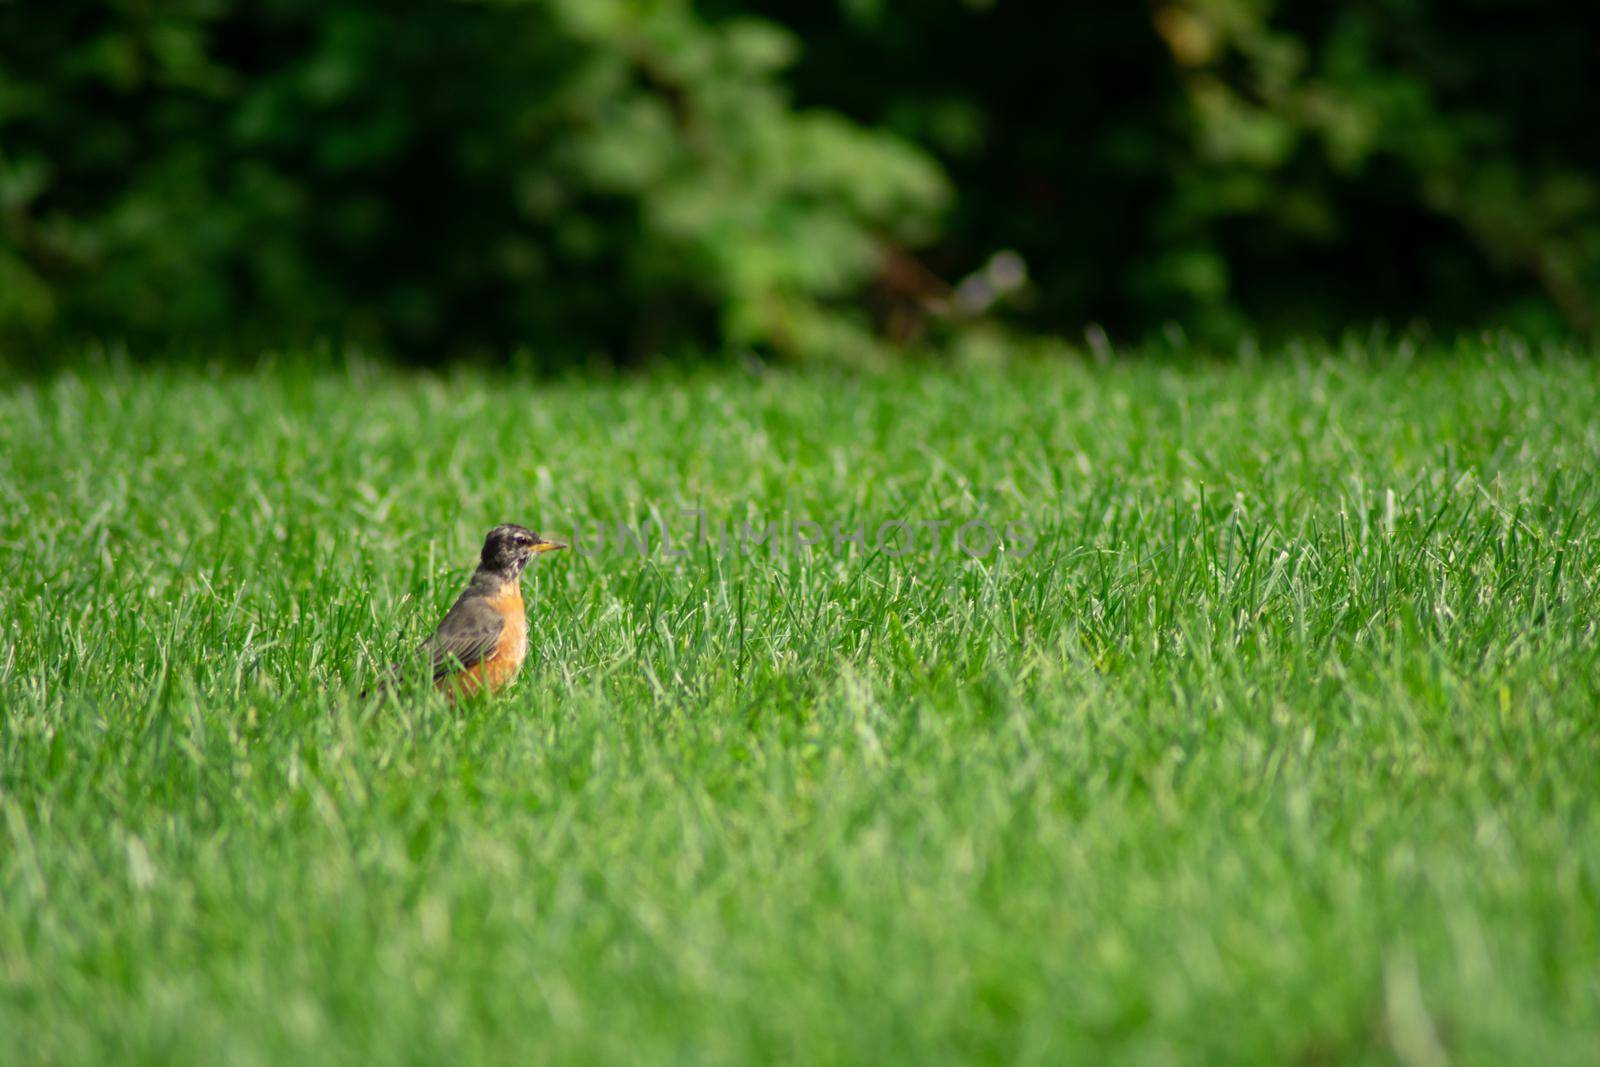 An American Robin in a Bright Green Grass Field by bju12290